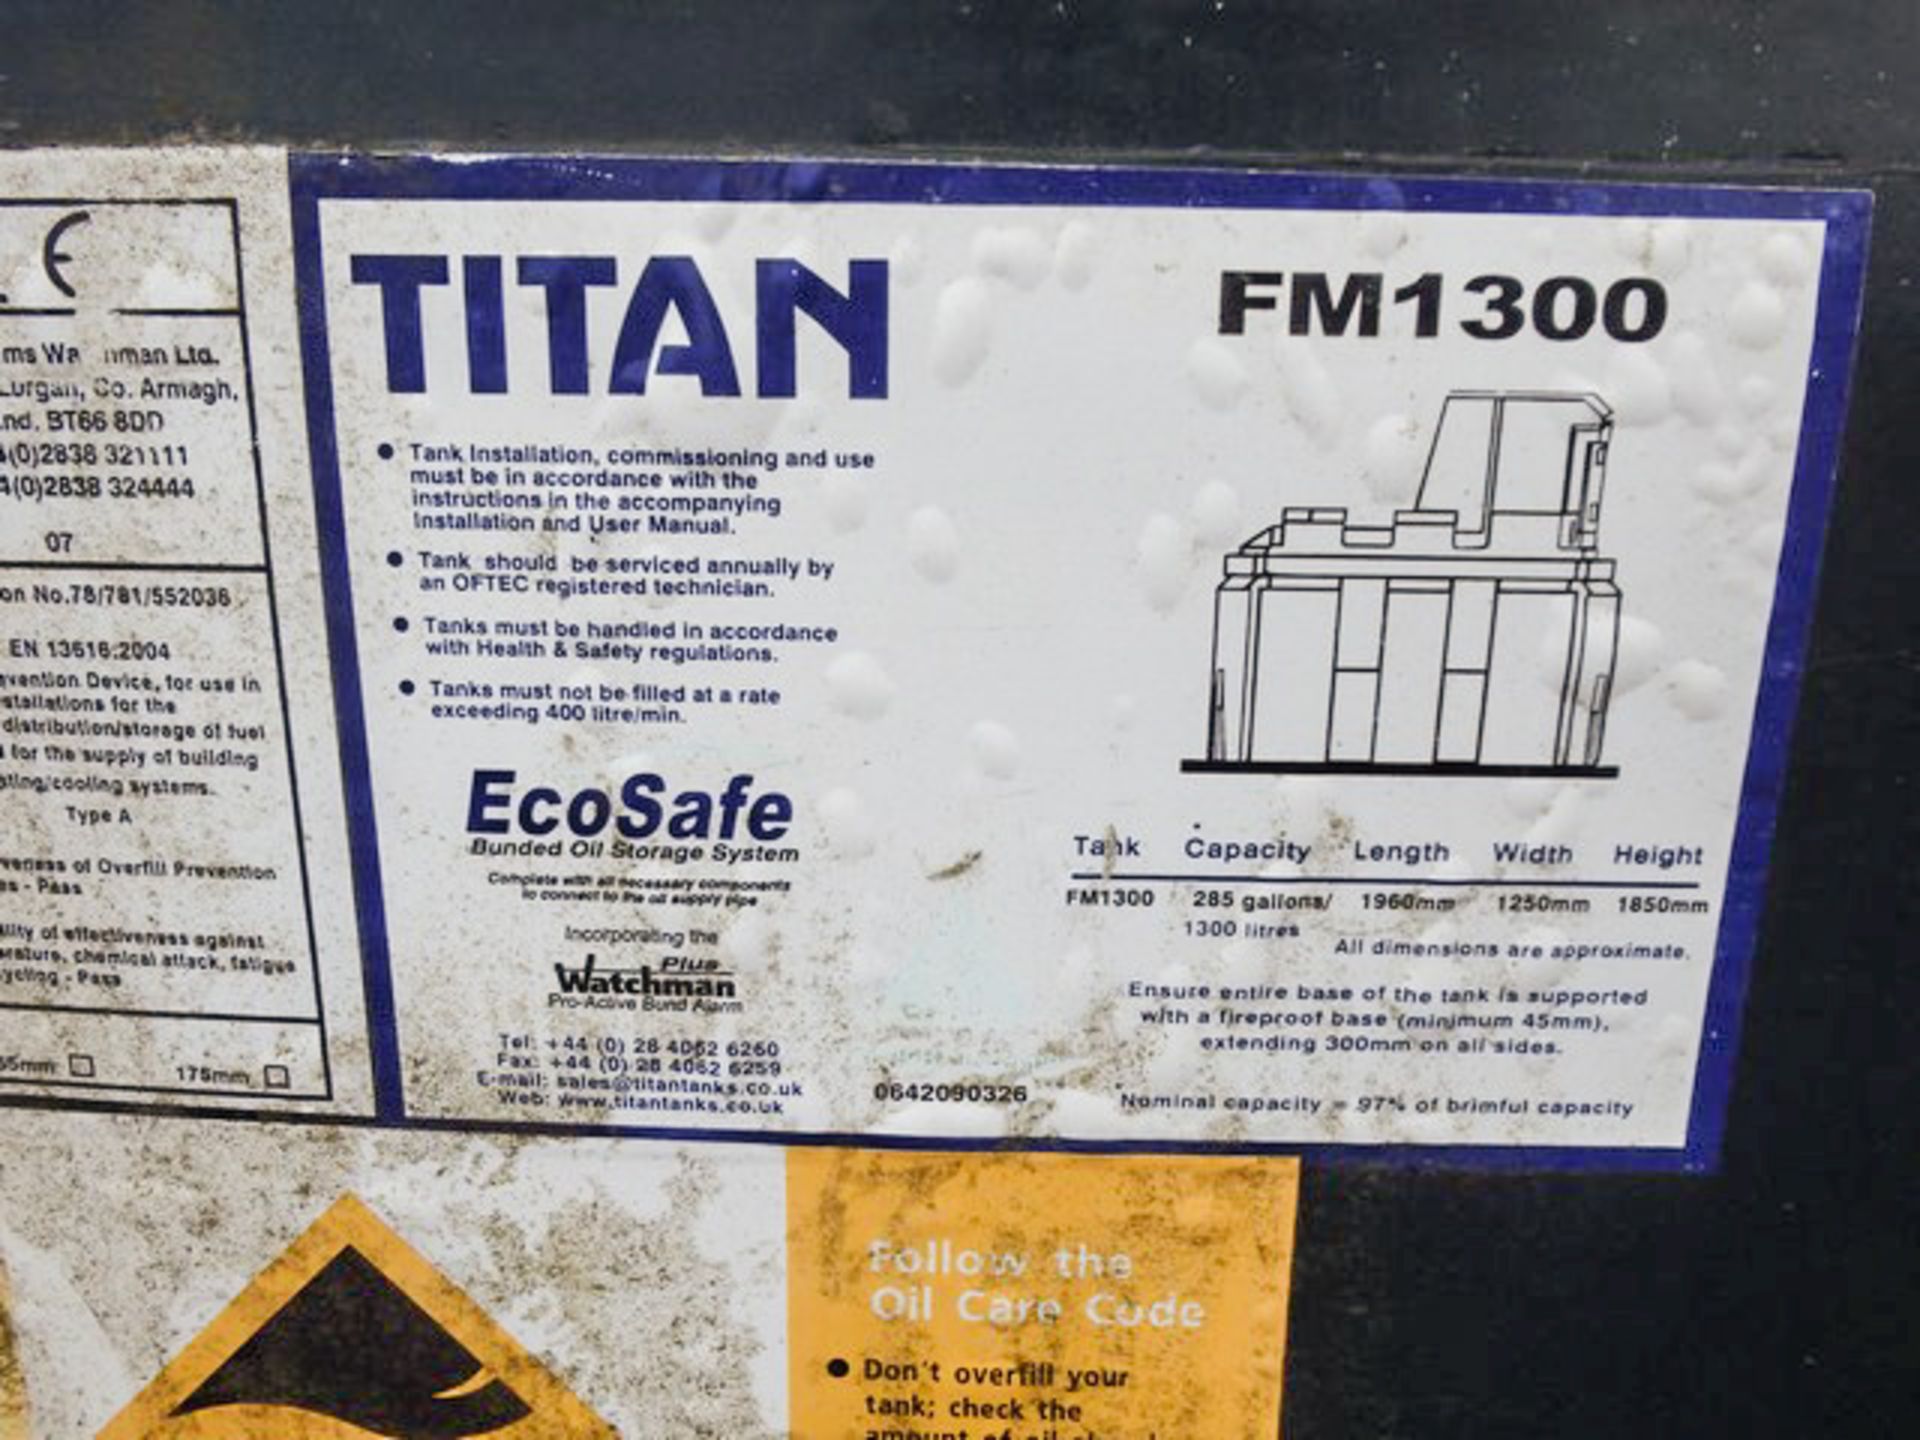 TITAN FM1300 BUNDED FUEL TANK, 286 GALLON CAPACITY (APPROX), C/W ROTARY HAND PUMP, SPILL STOP OVERFL - Image 2 of 3